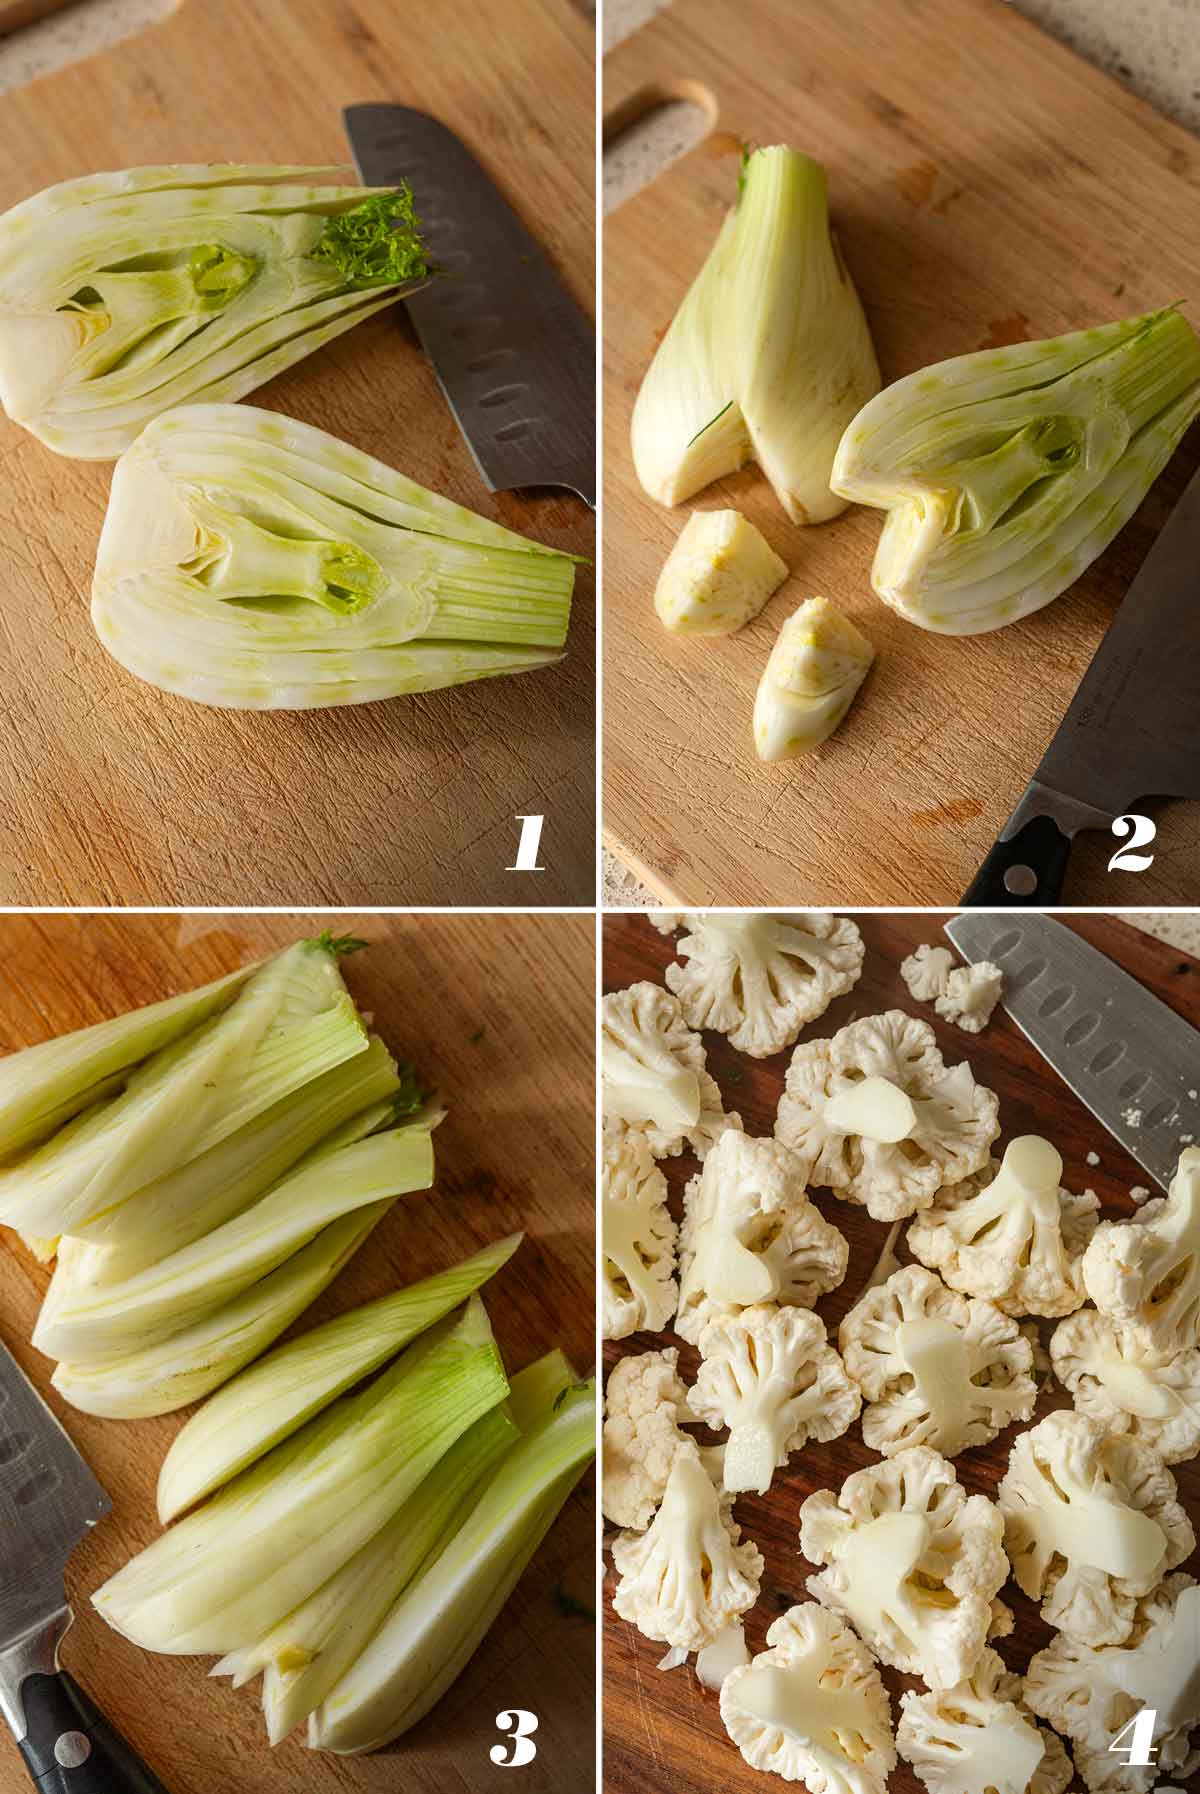 A collage of 4 numbered images showing how to slice vegetables.